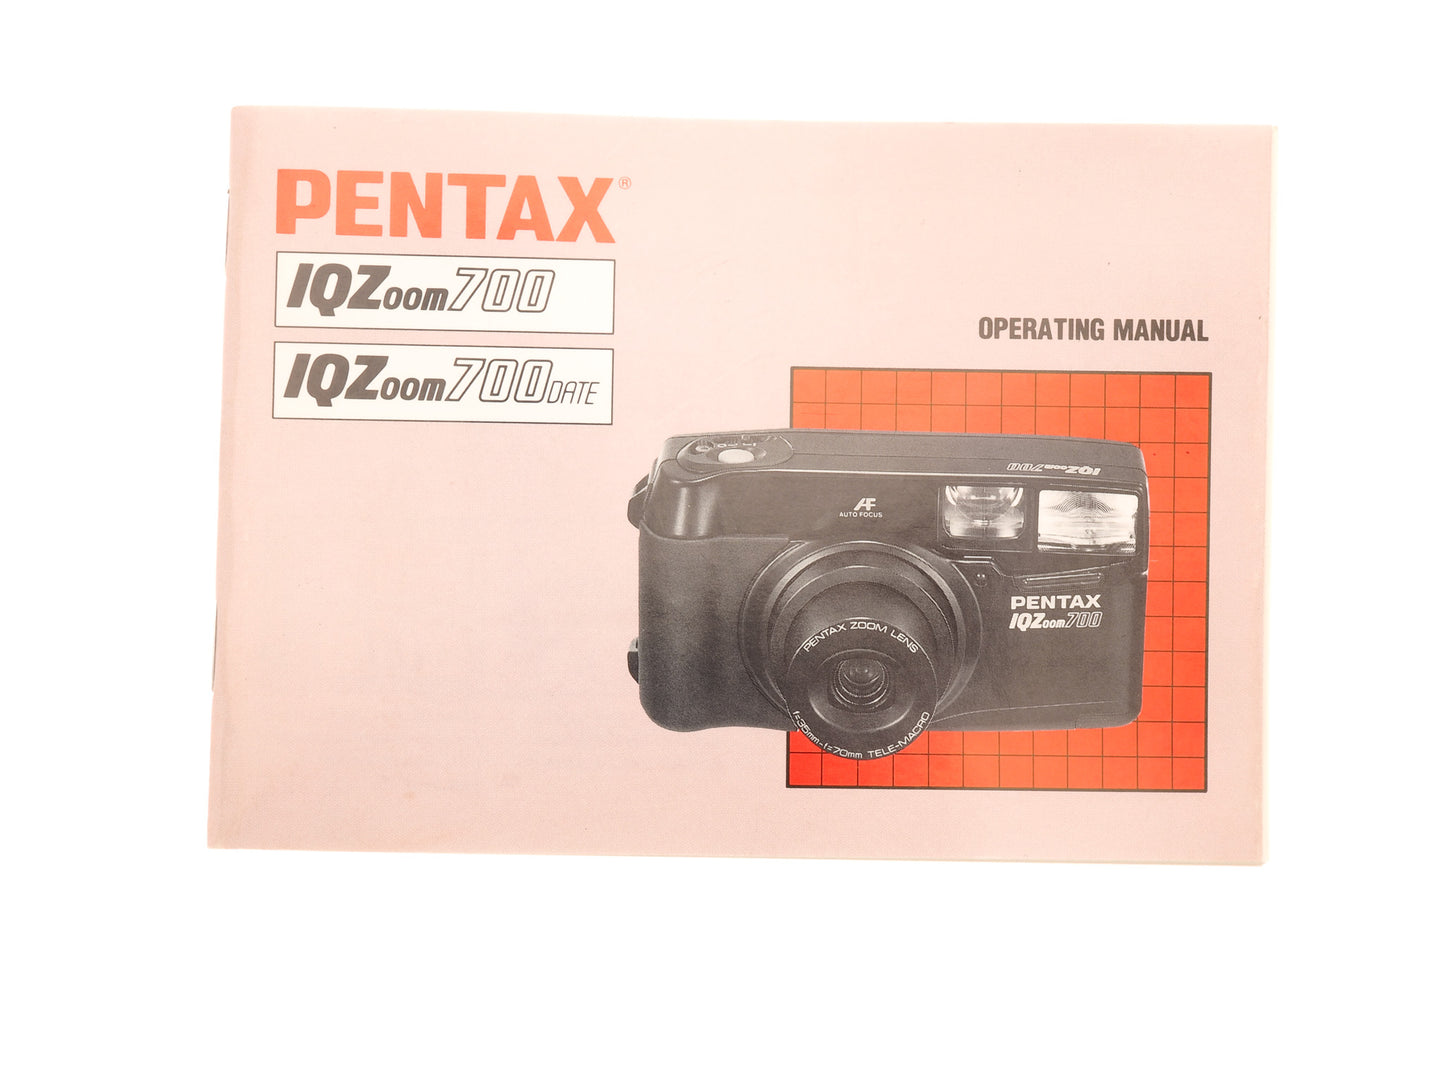 Pentax IQZoom700/IQZoom700 Date Instructions - Accessory